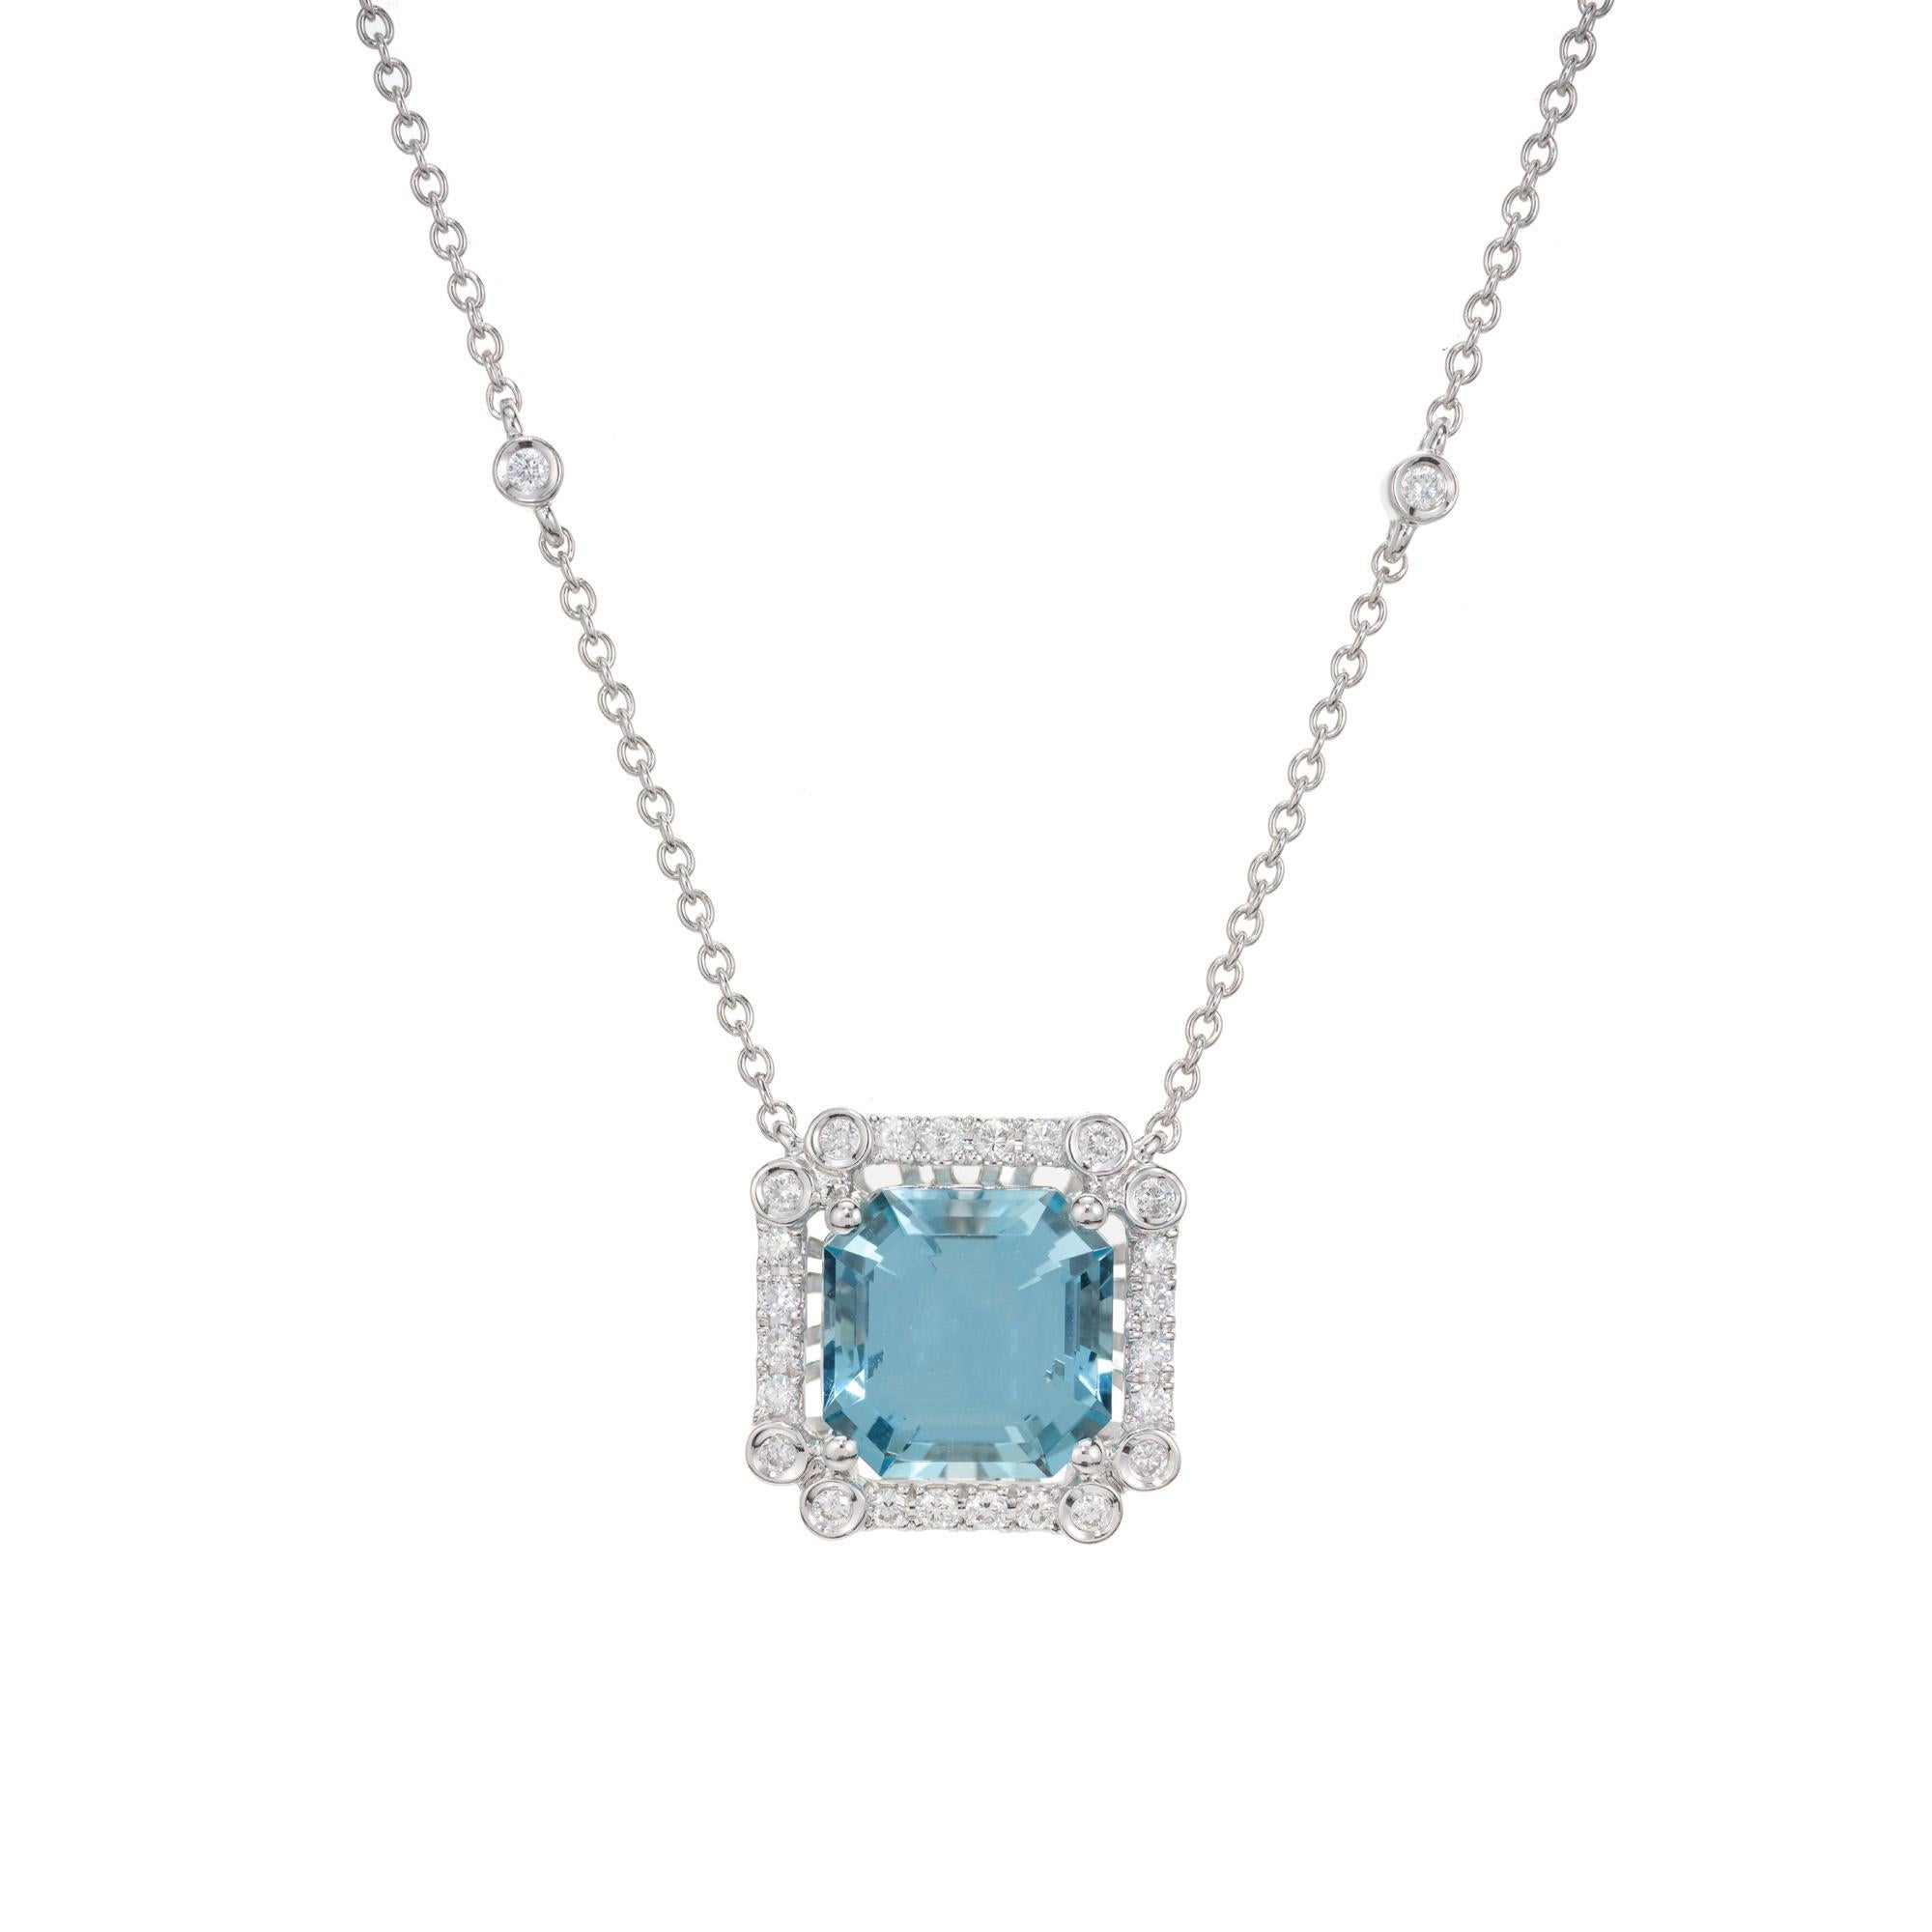 Aqua and diamond pendant necklace. 3.02ct bright blue aquamarine with a halo of 26 round diamonds set in a 18k white gold frame. 18k white gold chain with 2 bezel set  accent diamonds. The aqua is from a 1920's estate made into an Art Deco style